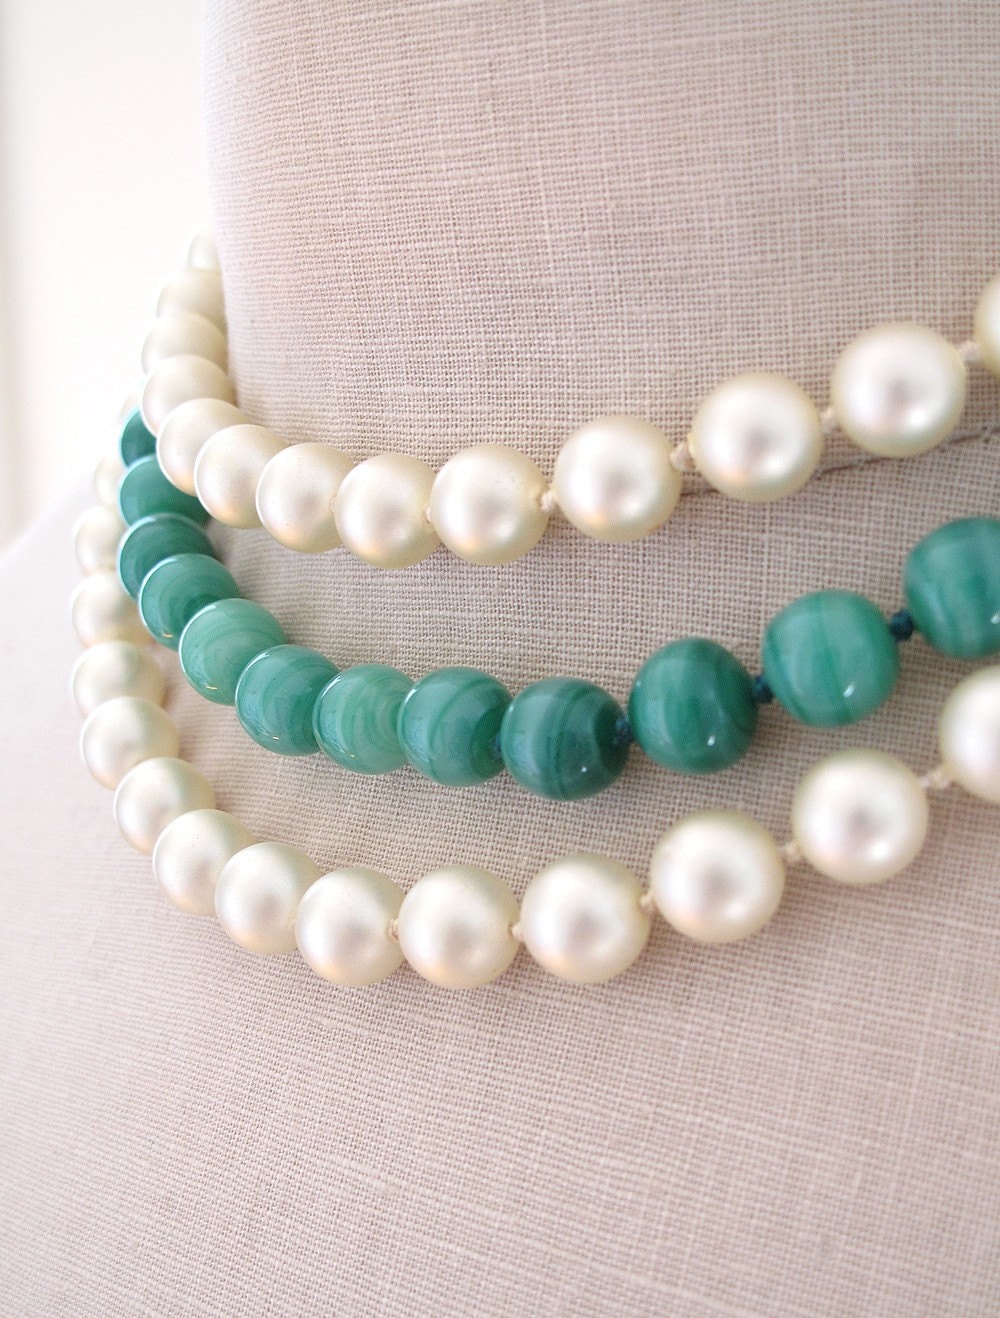 This beautiful three strand necklace sits close to the neck. It is made of two strands of pearls and one strand of green glass beads that resemble Jade. The most beautiful feature of this necklace is the ornate gold clasp with a green bead set in the center. The clasp is 1.25